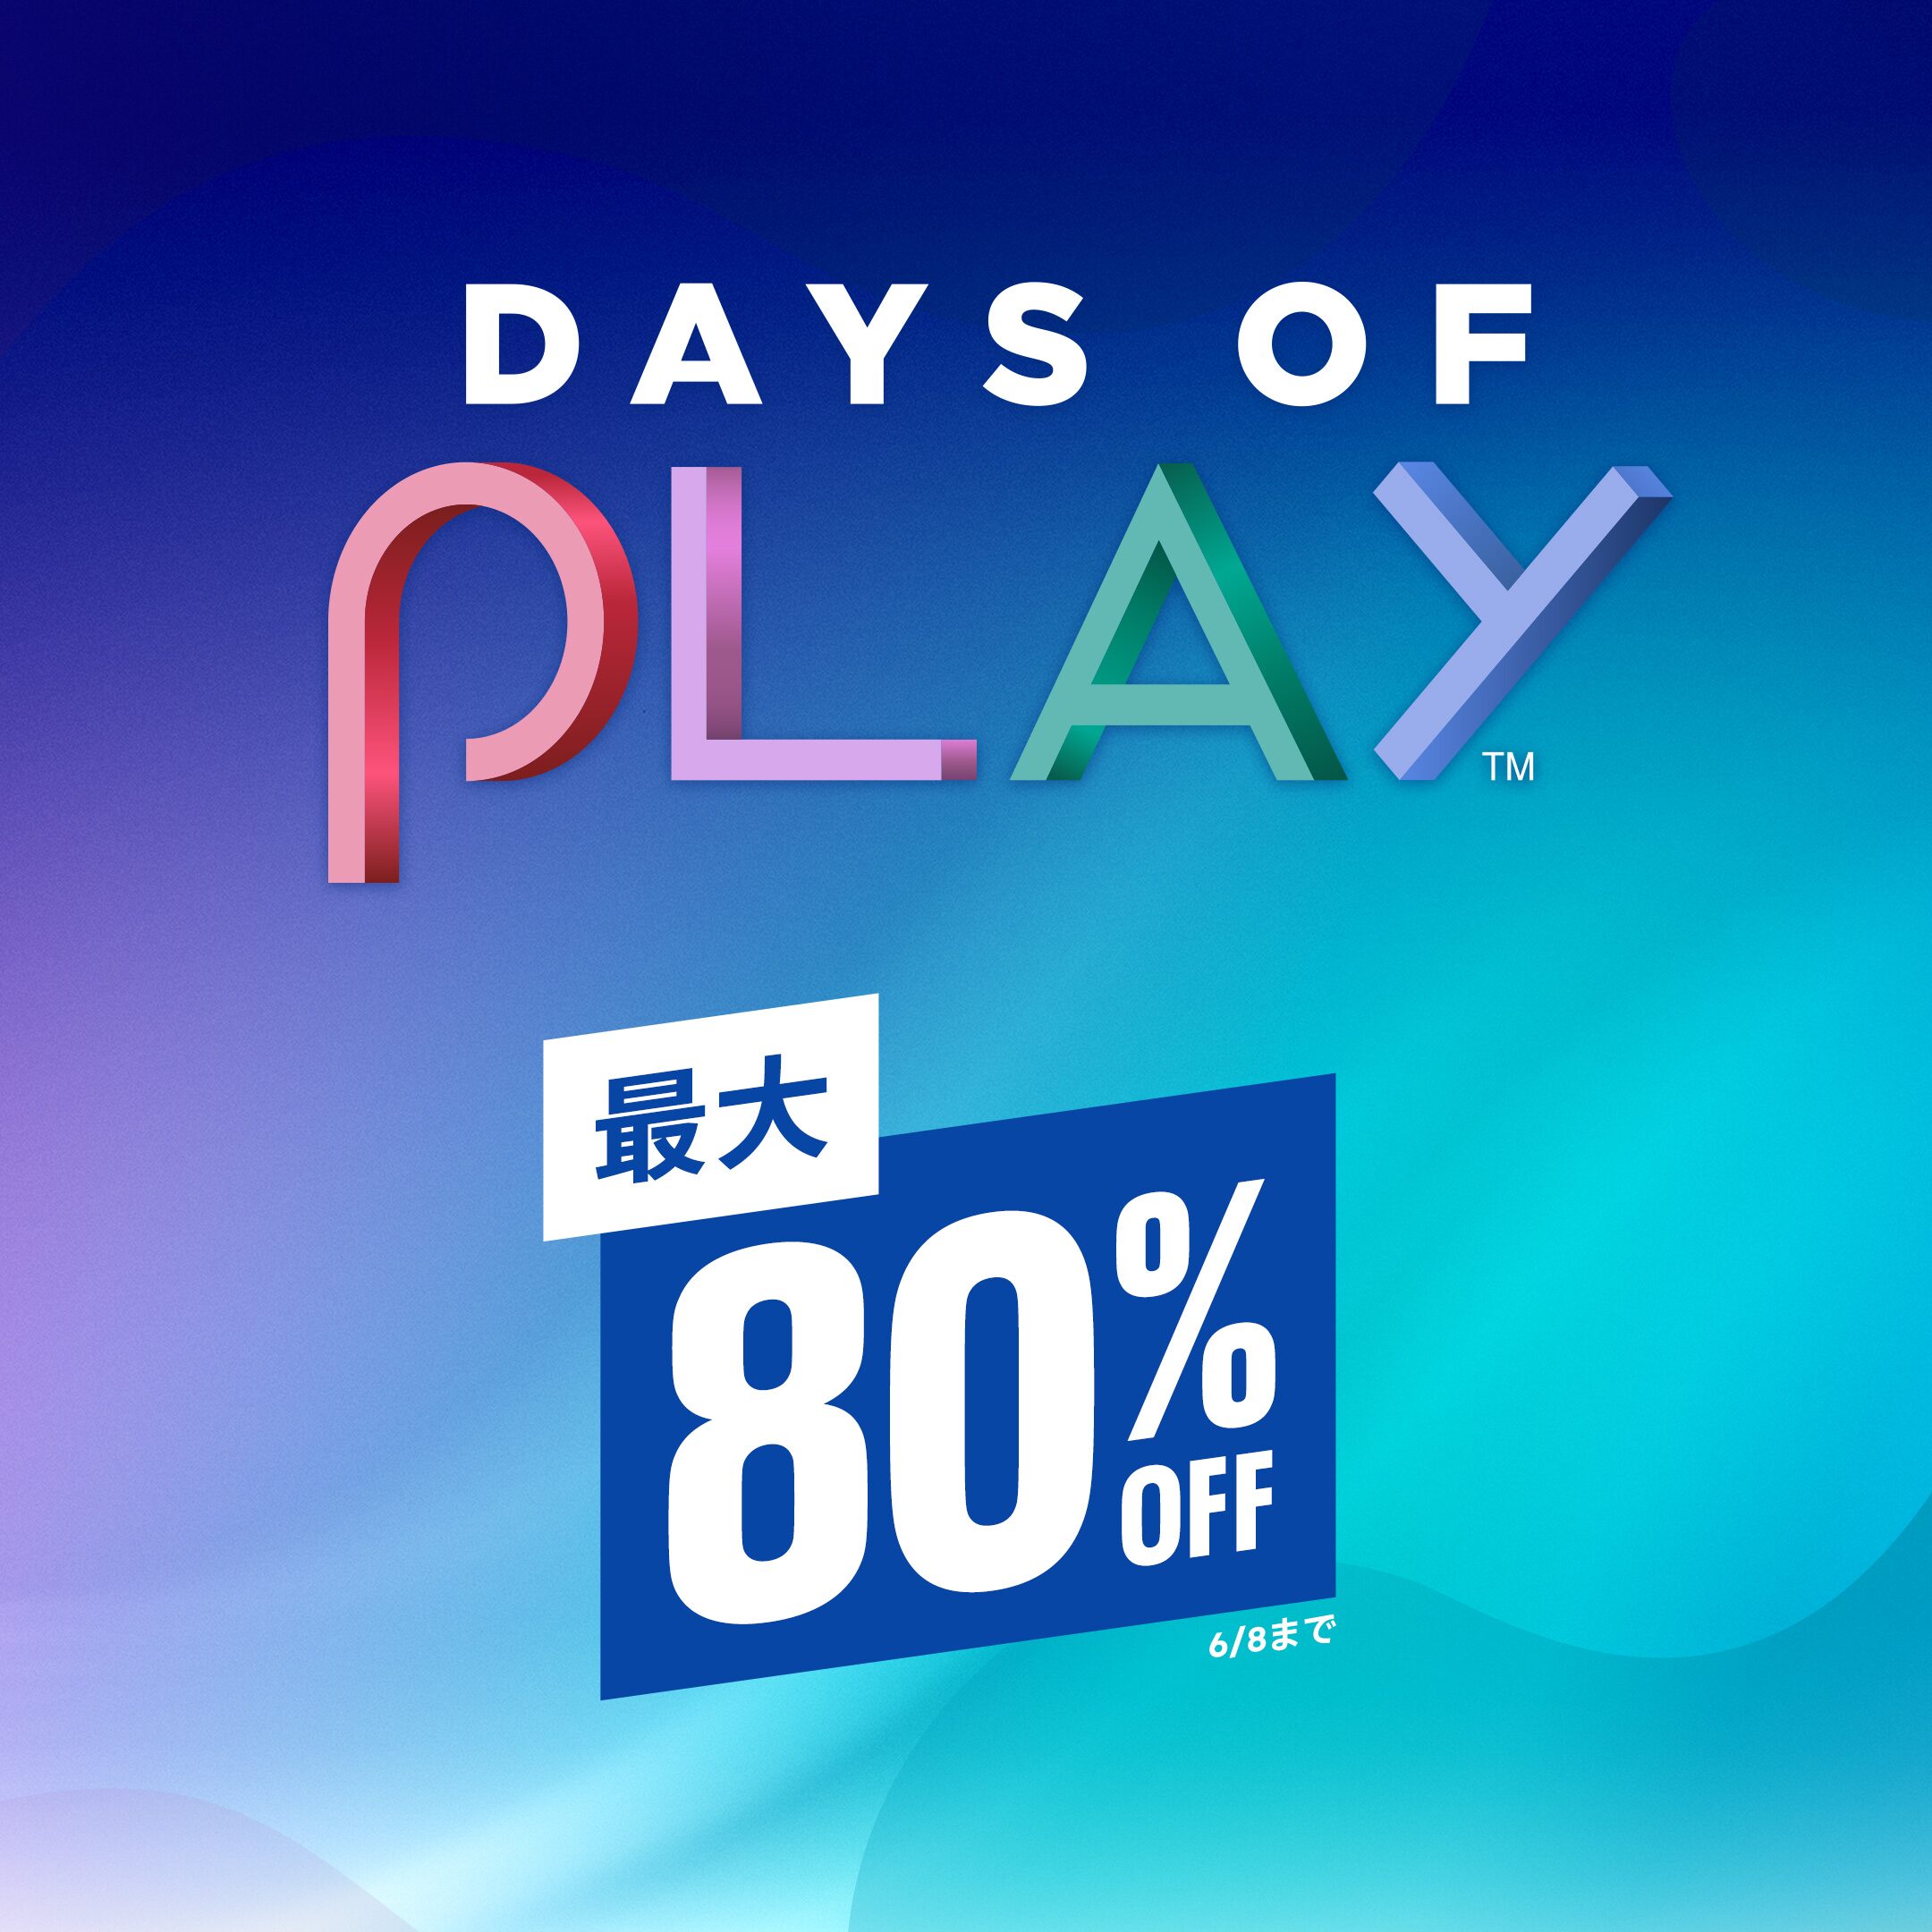 [PROMO] Days of Play 2022